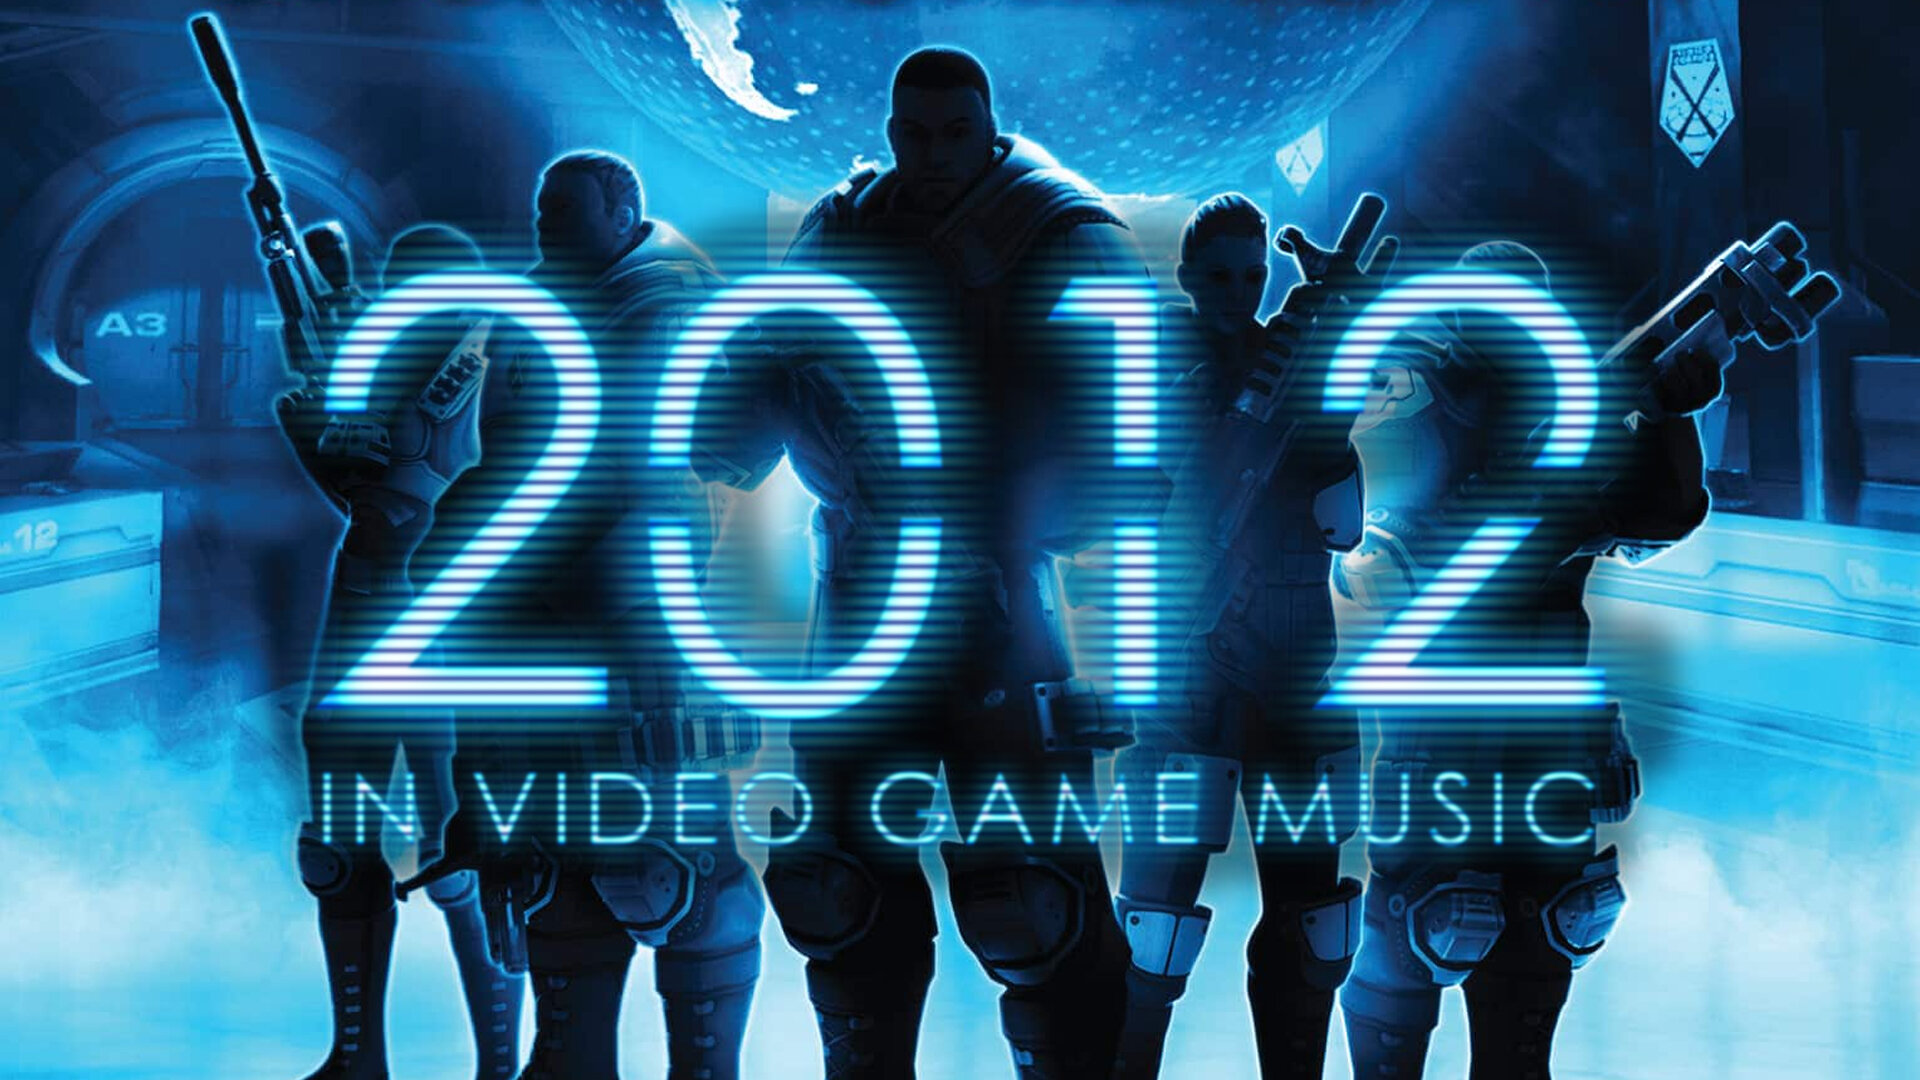 2012 in Video Game Music